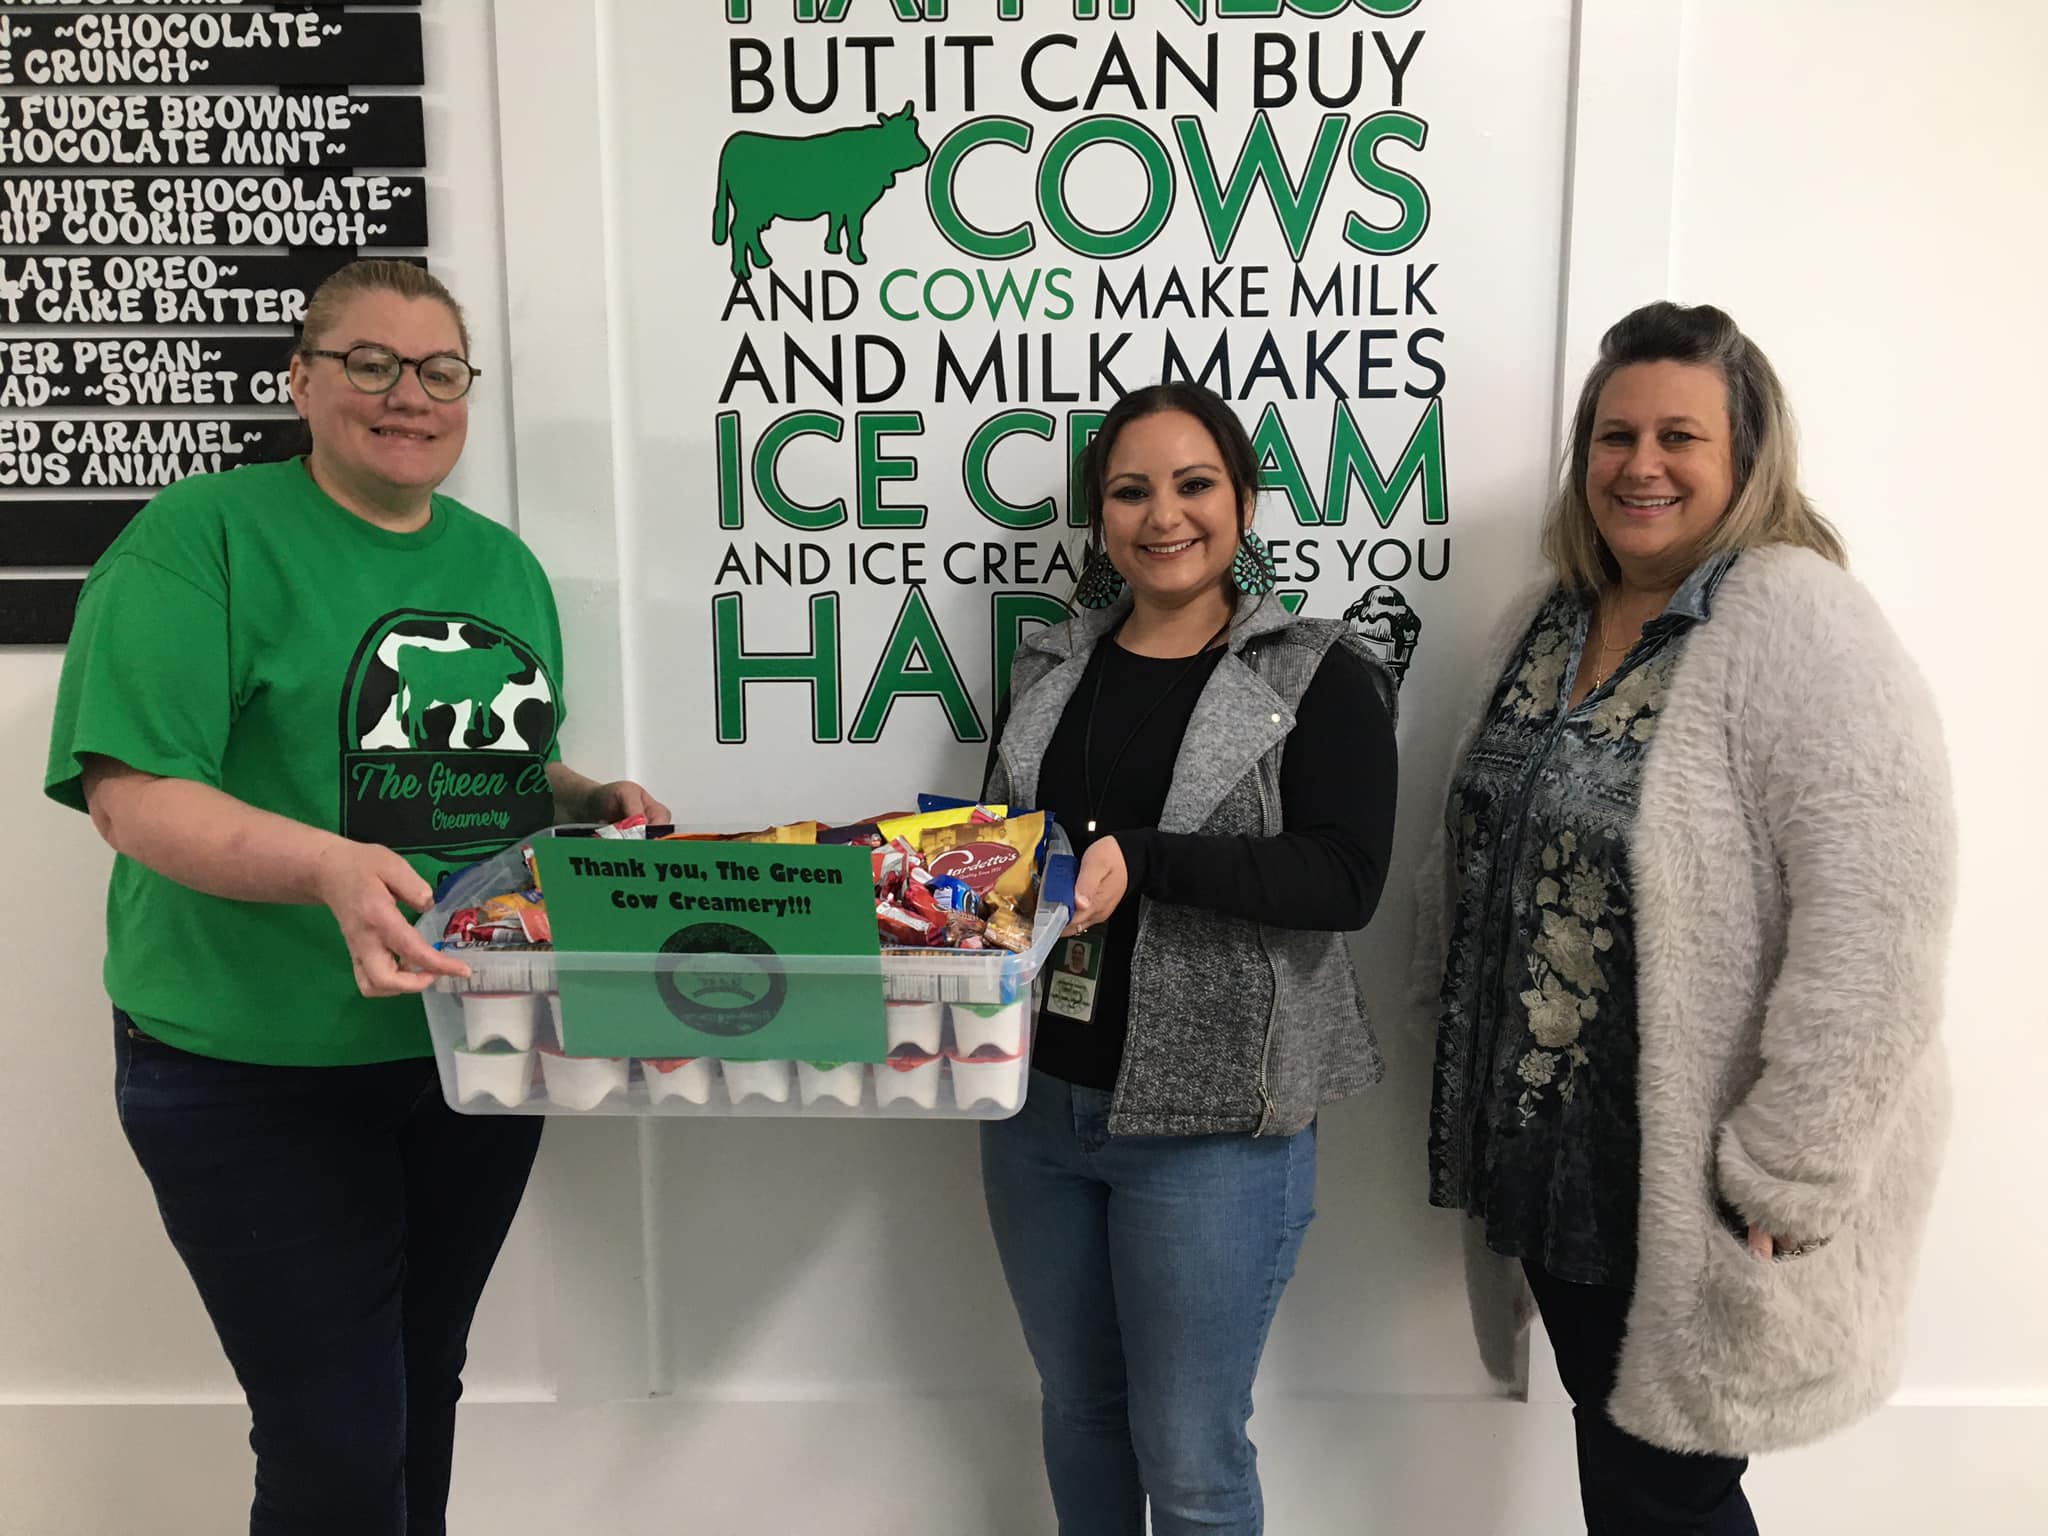 December Events Committee presents “thank you” snack care package to Green Cow Creamery